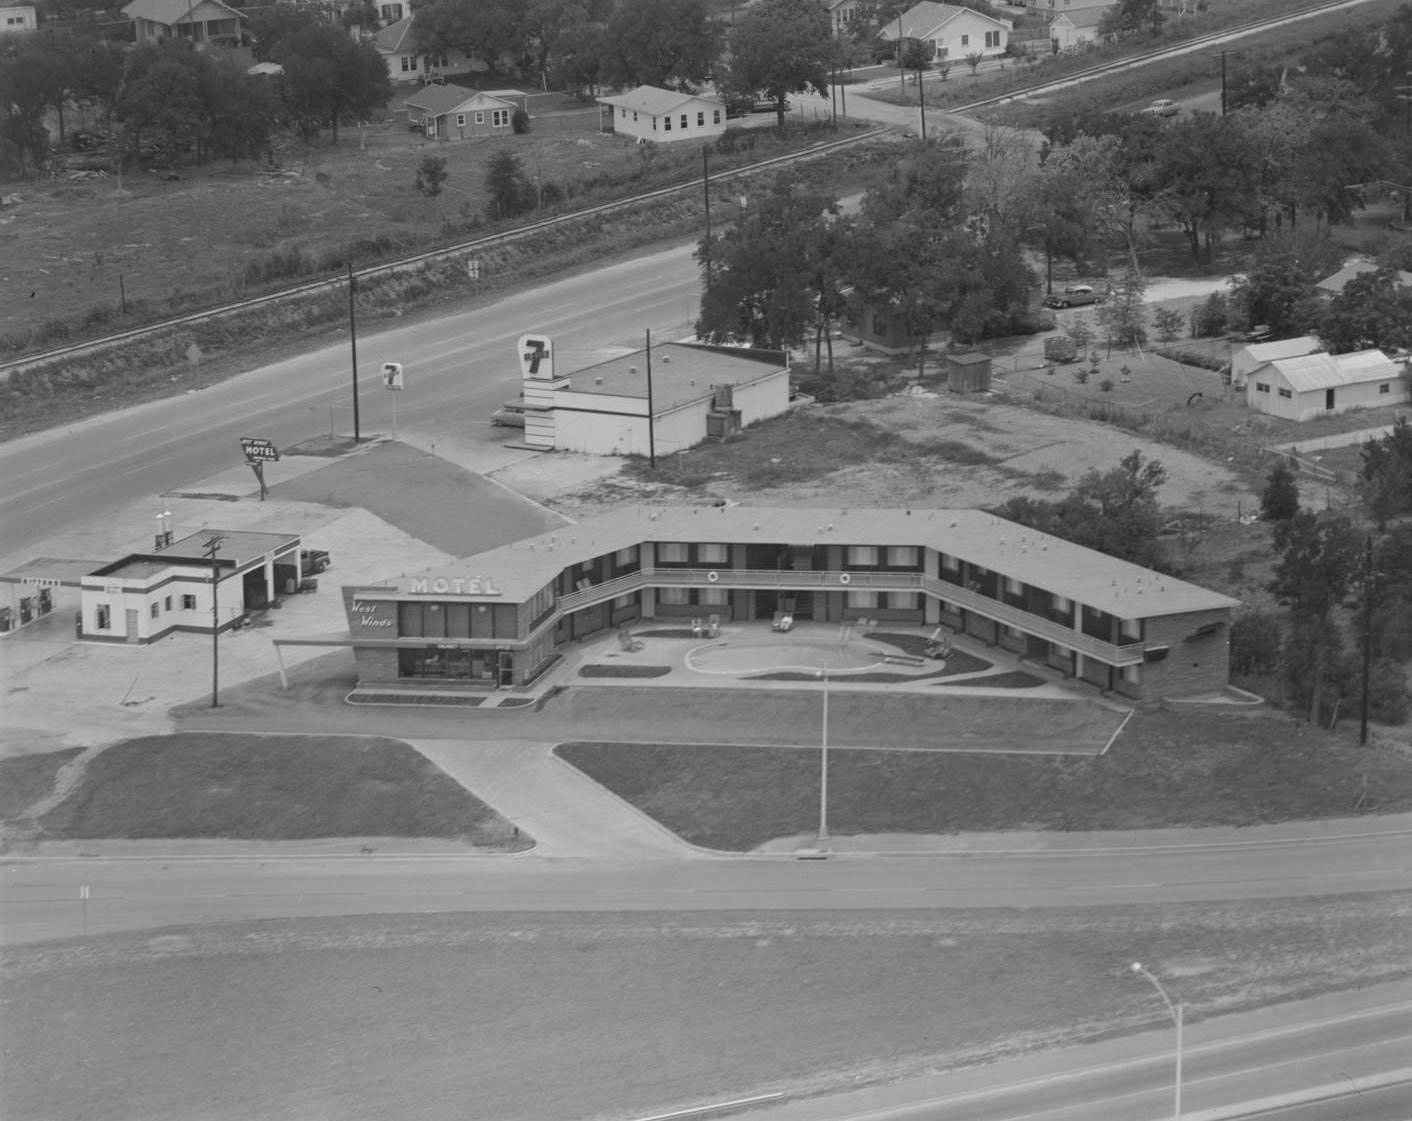 An aerial view of the West Winds Motel, 1956